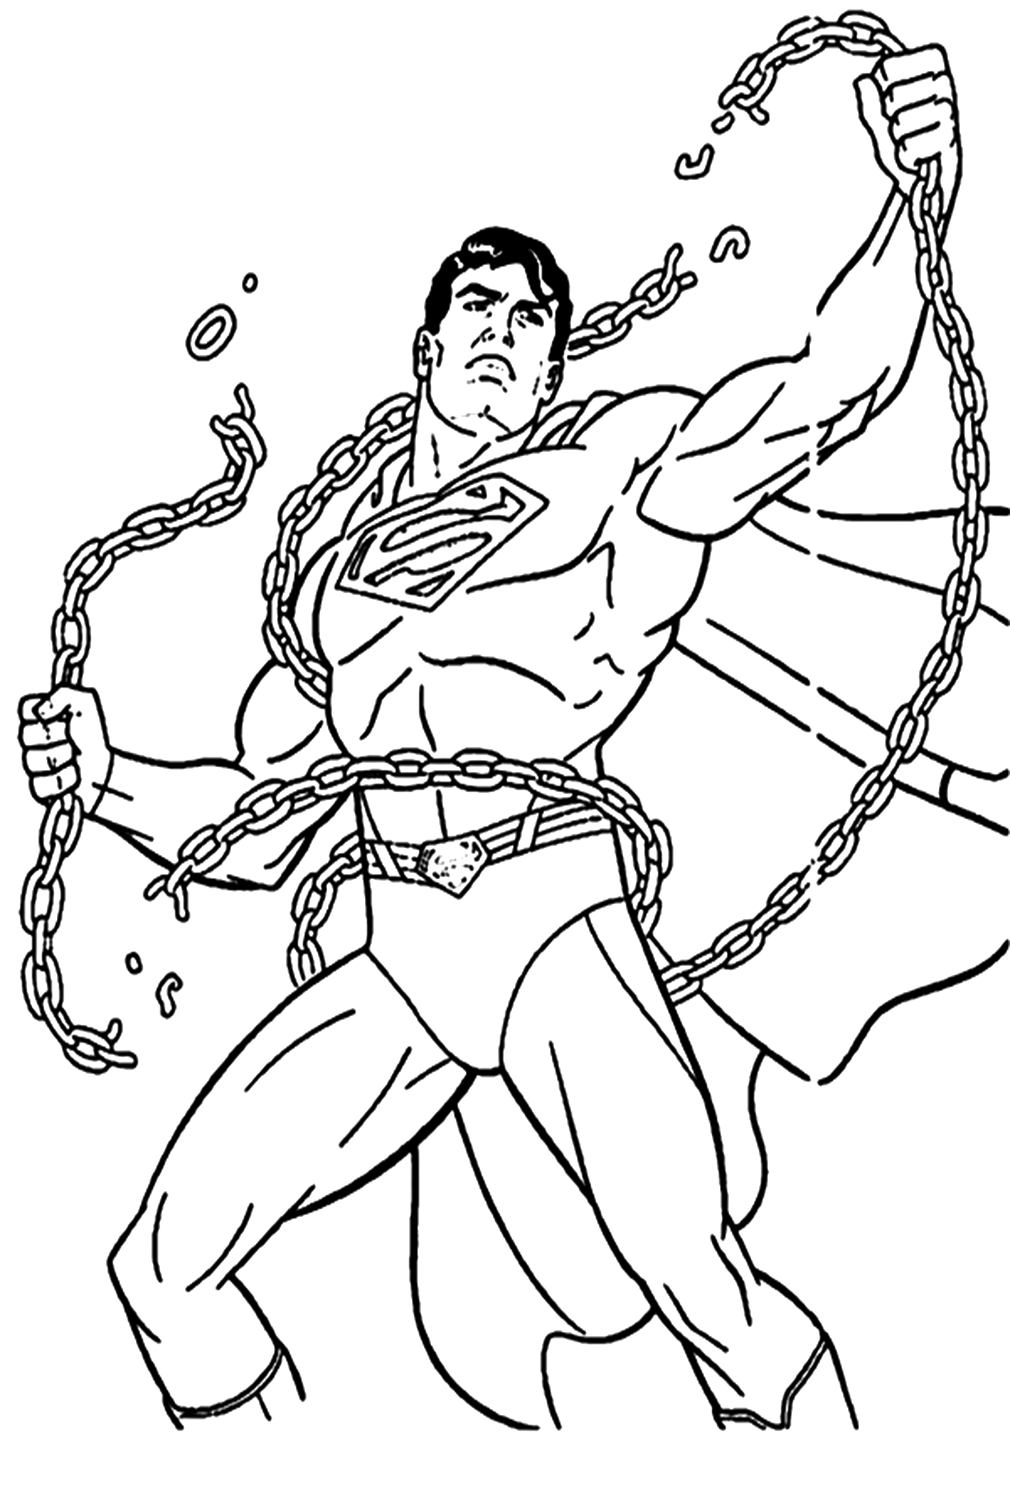 Superman Broke The Chains Coloring Pages